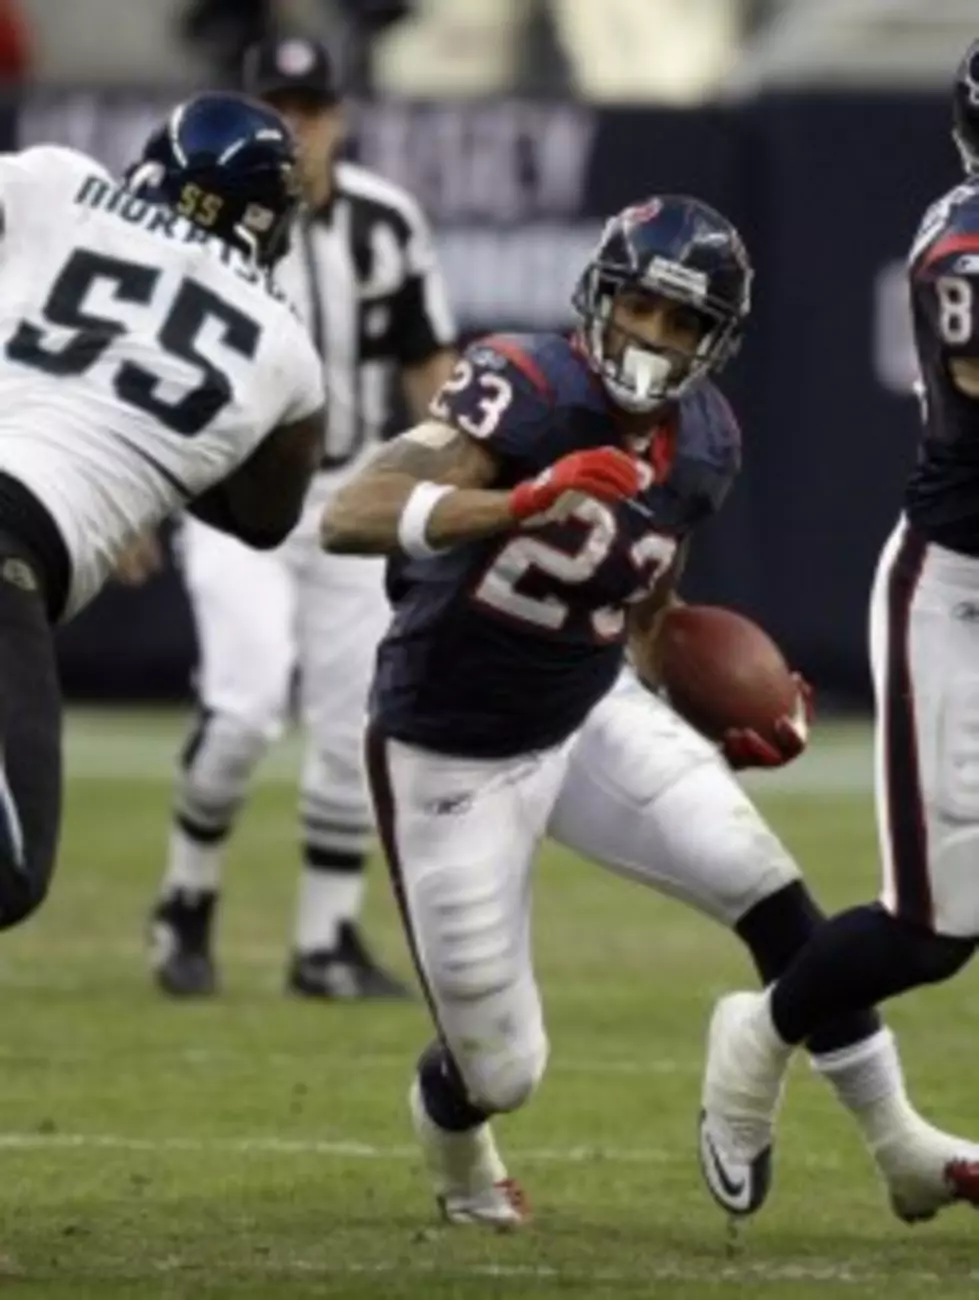 Houston Texans RB Arian Foster Returns to Practice Field